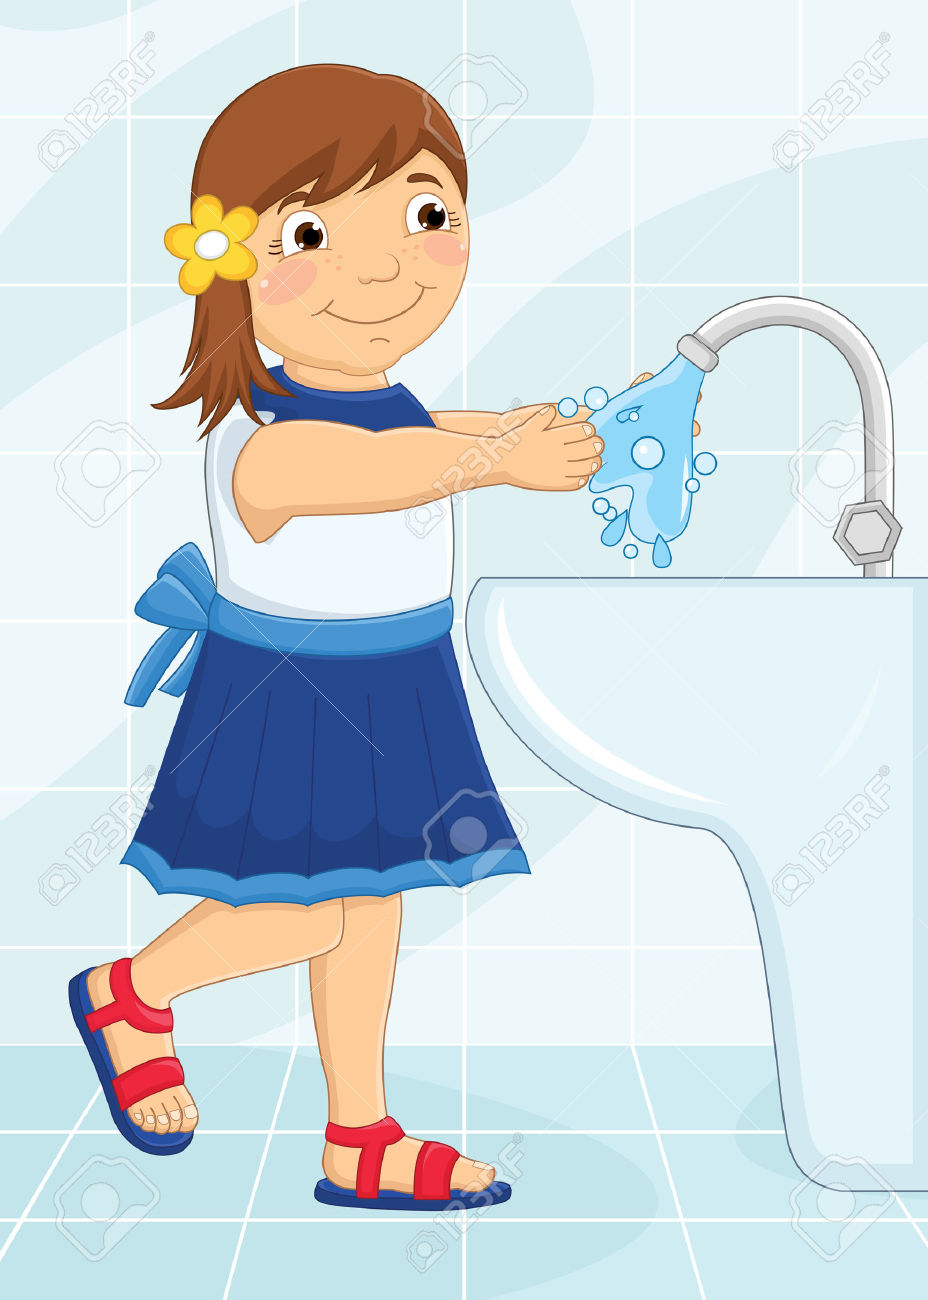 Washing hands with soap clipart 4 » Clipart Station.